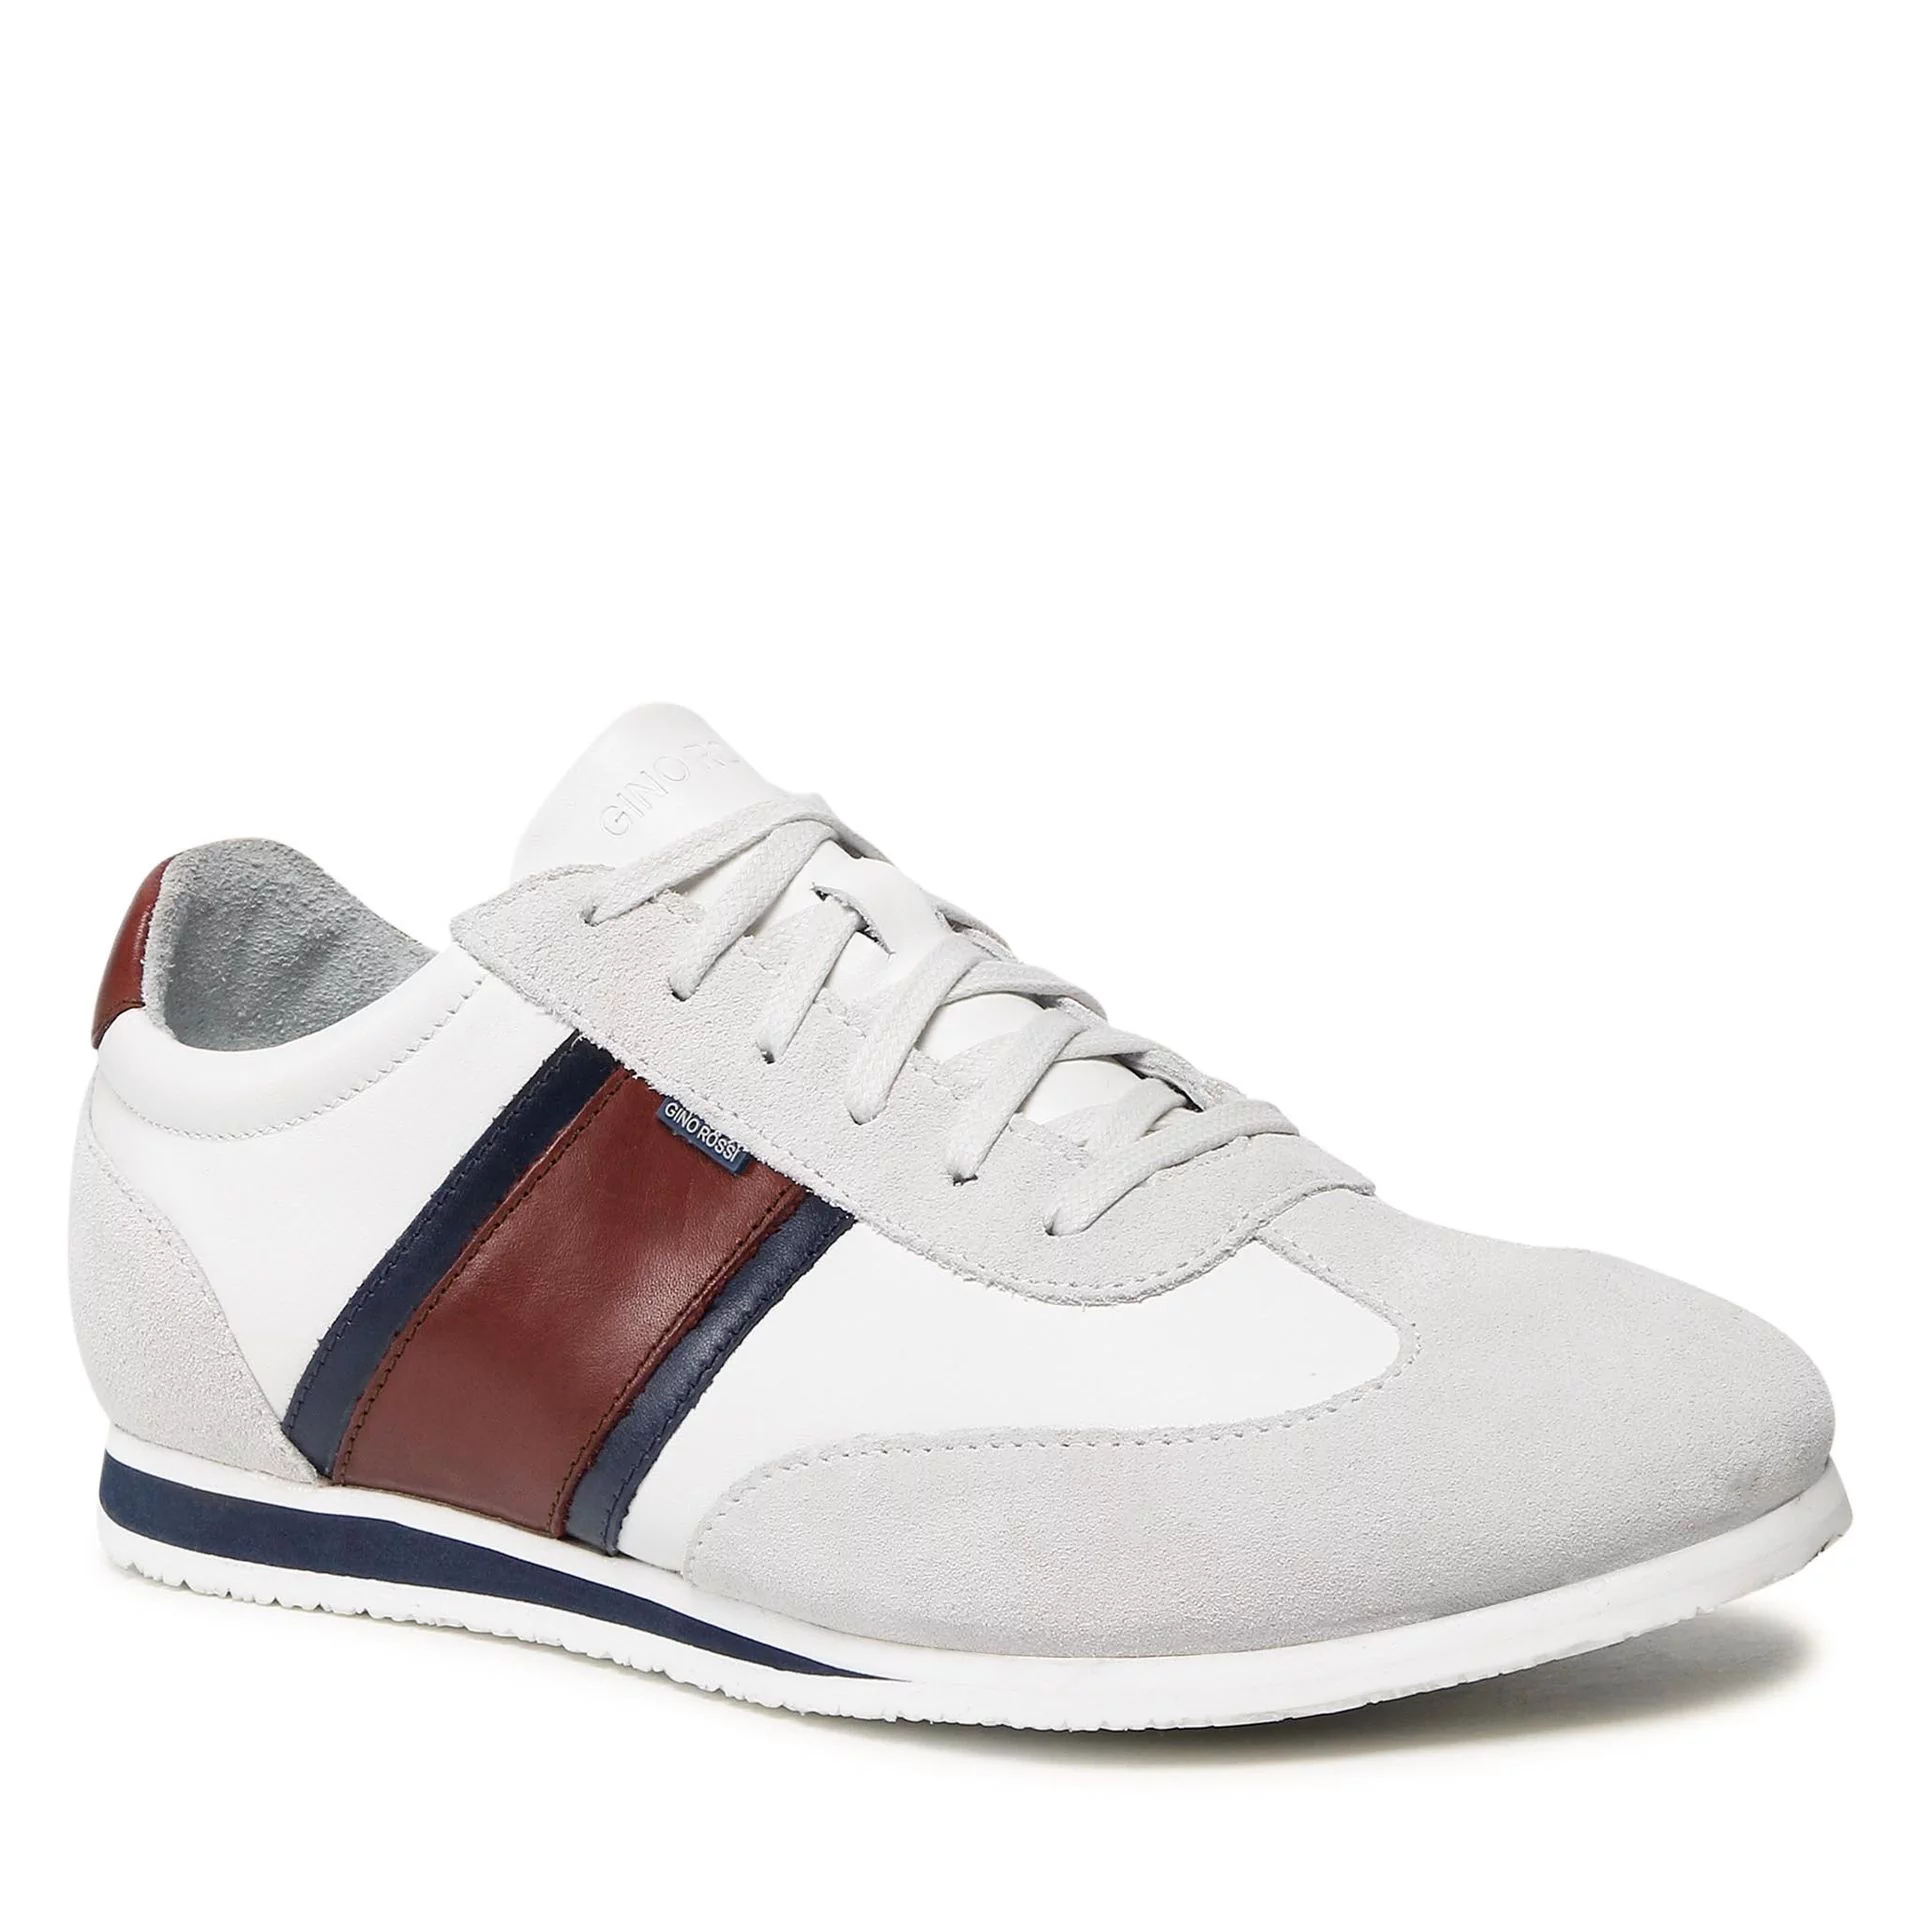 Sneakersy GINO ROSSI - MB-BELSYDE-02 White - Ceny i opinie na Skapiec.pl